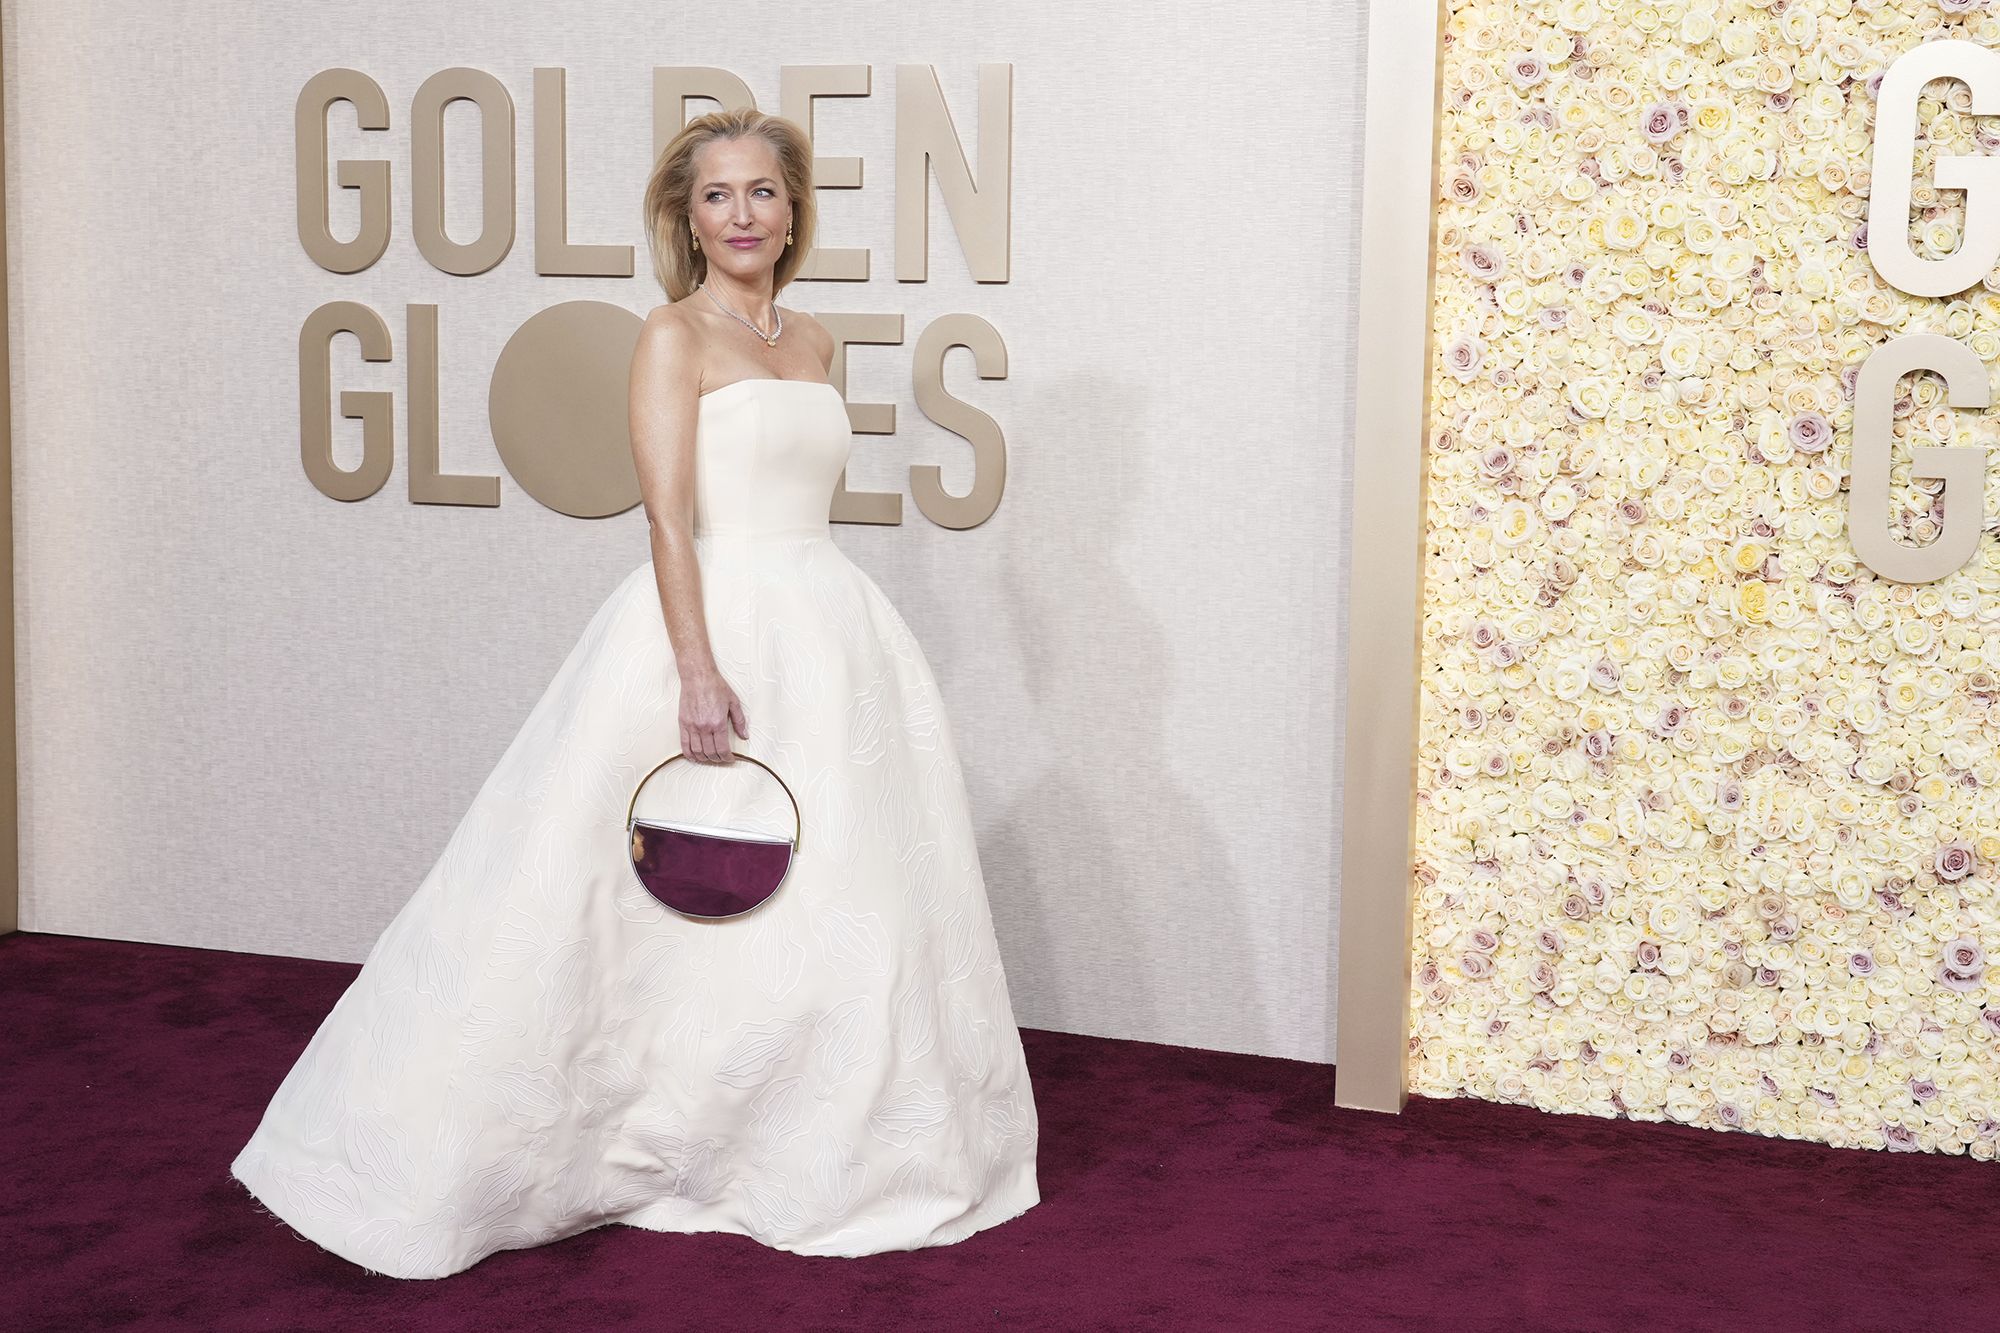 Gillian Anderson's Golden Globes gown was created by Gabriela Hearst and featured subtle embroidered vulvas on the skirt. The addition took 150 hours.